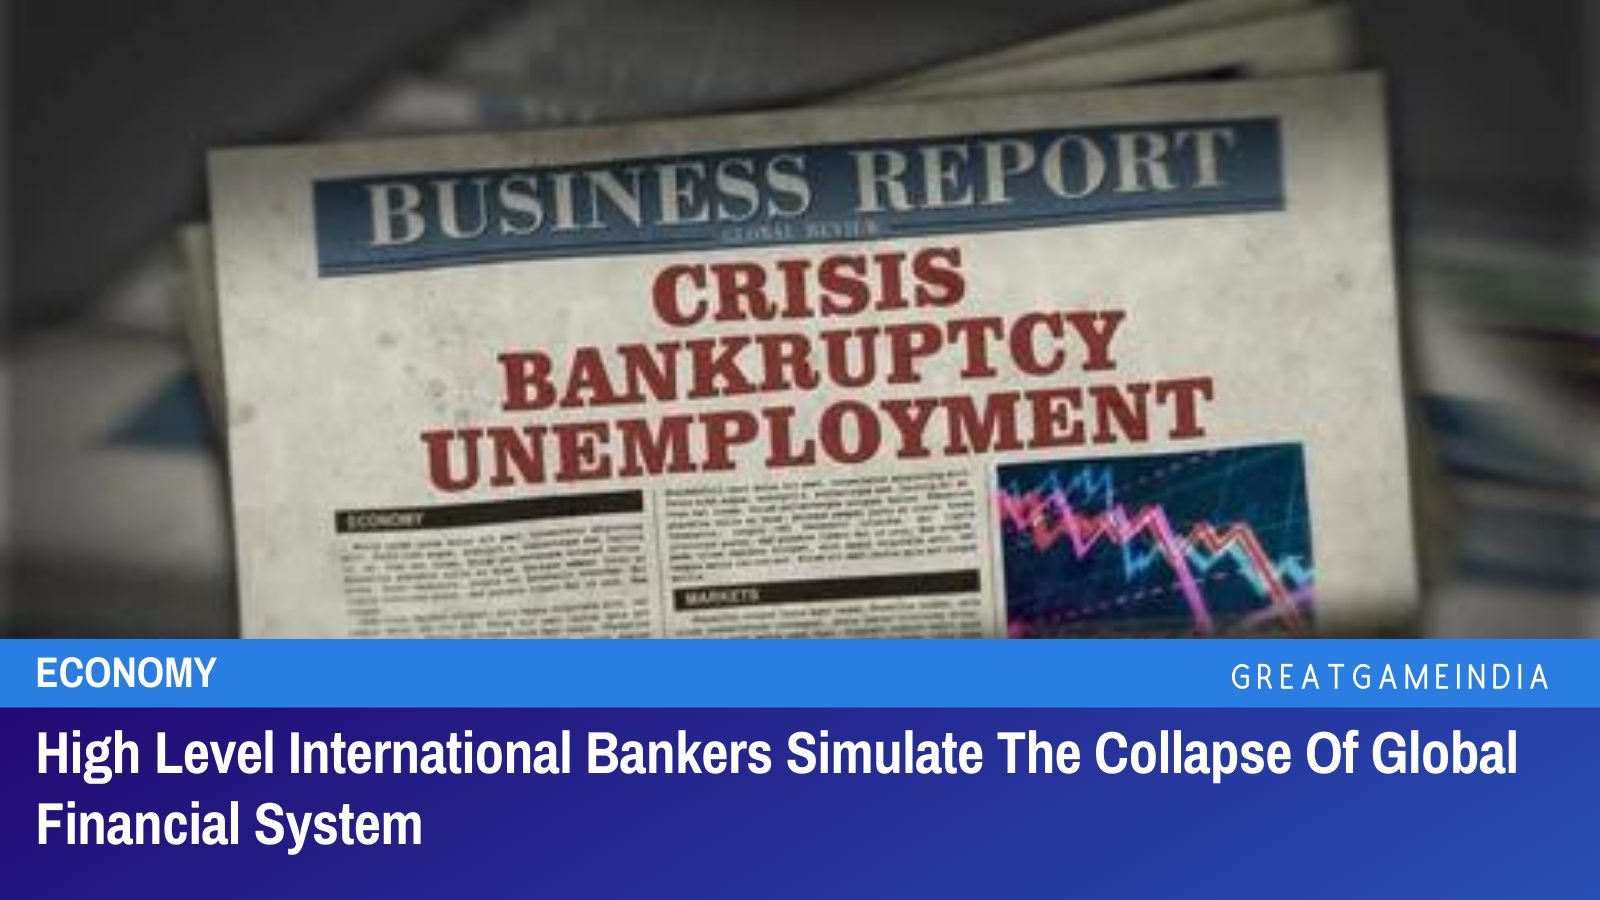 High Level International Bankers Simulate The Collapse Of Global Financial System